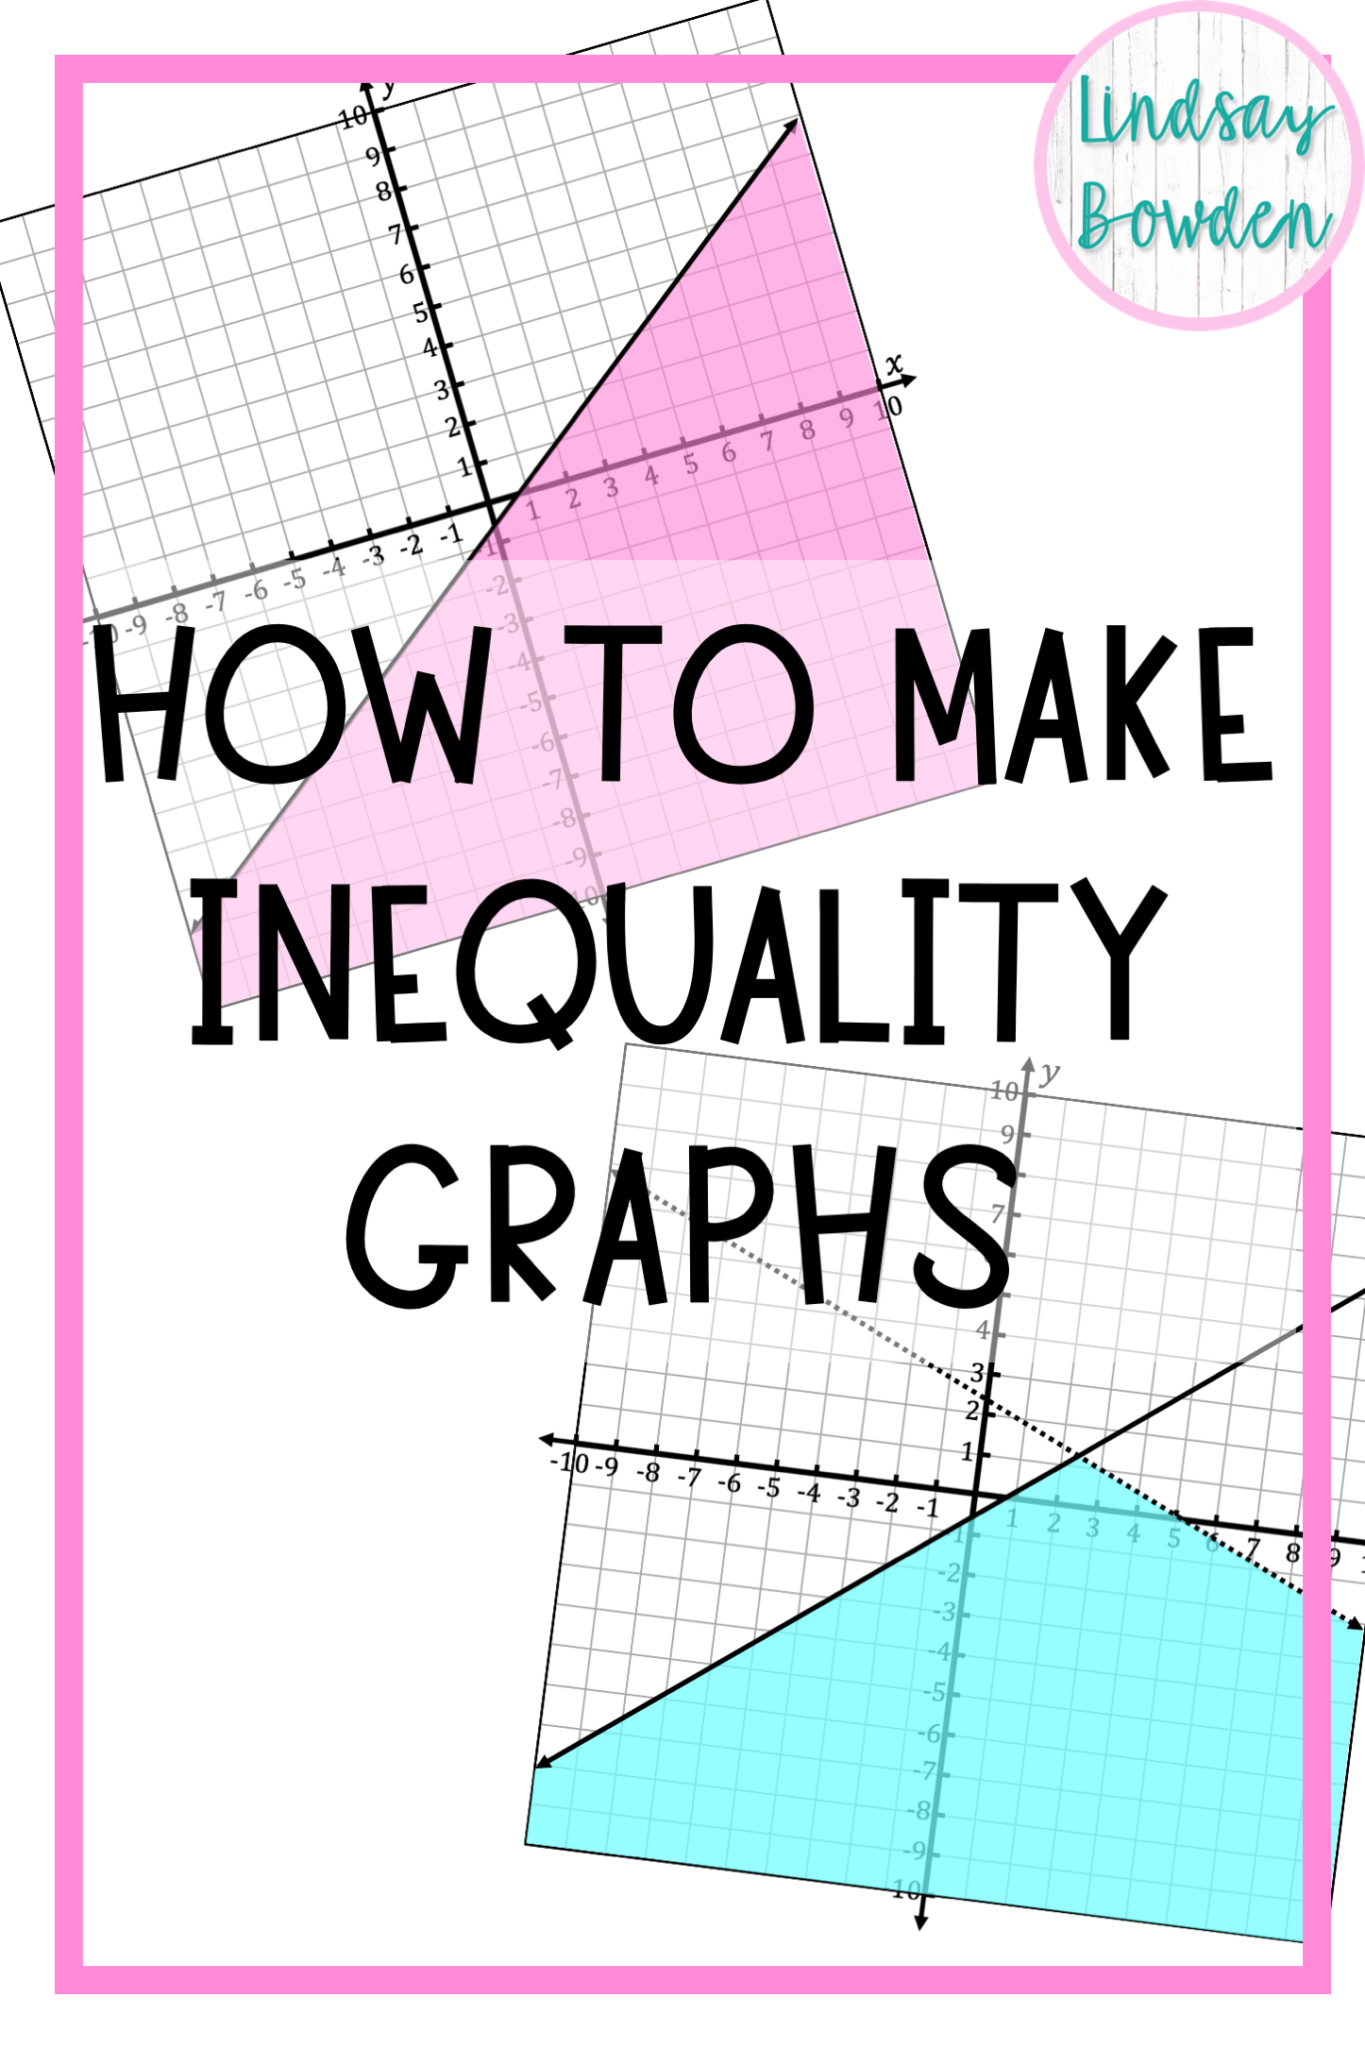 how-to-make-inequality-graphs-for-math-worksheets-lindsay-bowden